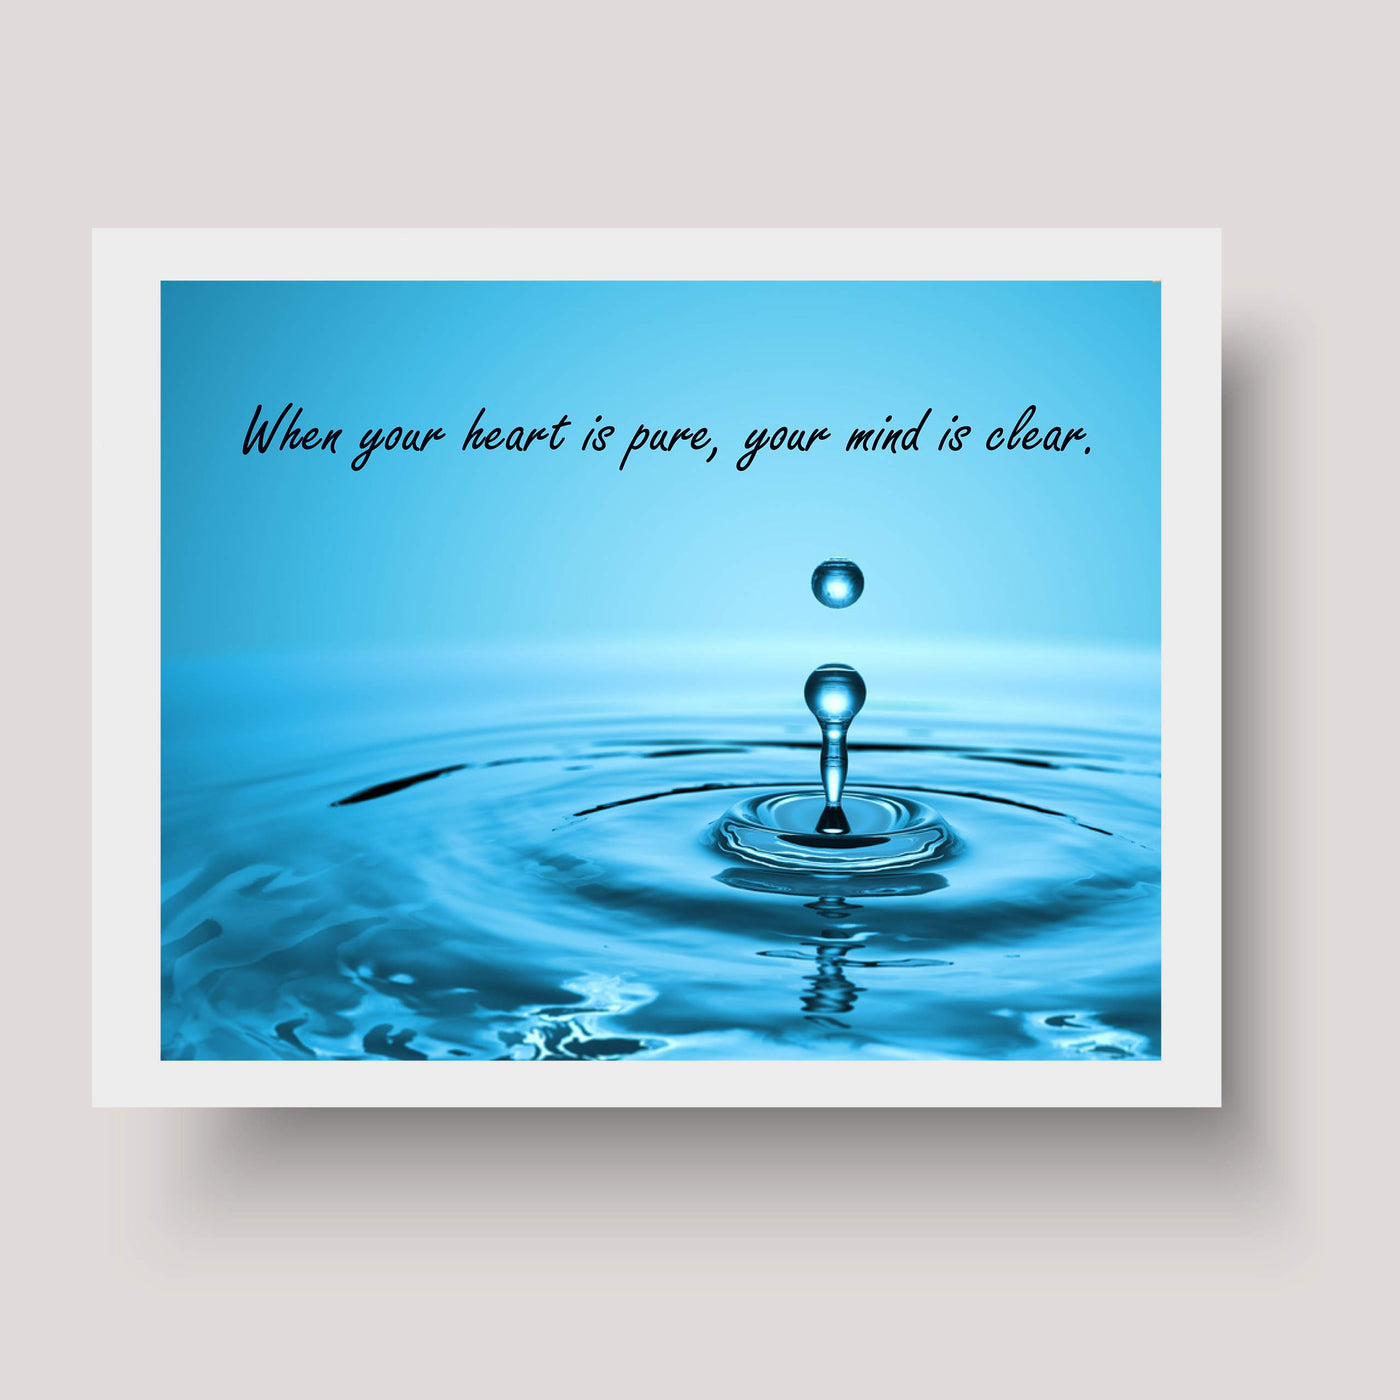 ?When Your Heart Is Pure, Your Mind Is Clear?-Spiritual Quotes Wall Art - 10 x 8" Inspirational Poster Print-Ready to Frame. Home-Office-Yoga Studio-Spa Decor. Great Zen Reminder for Relaxation!